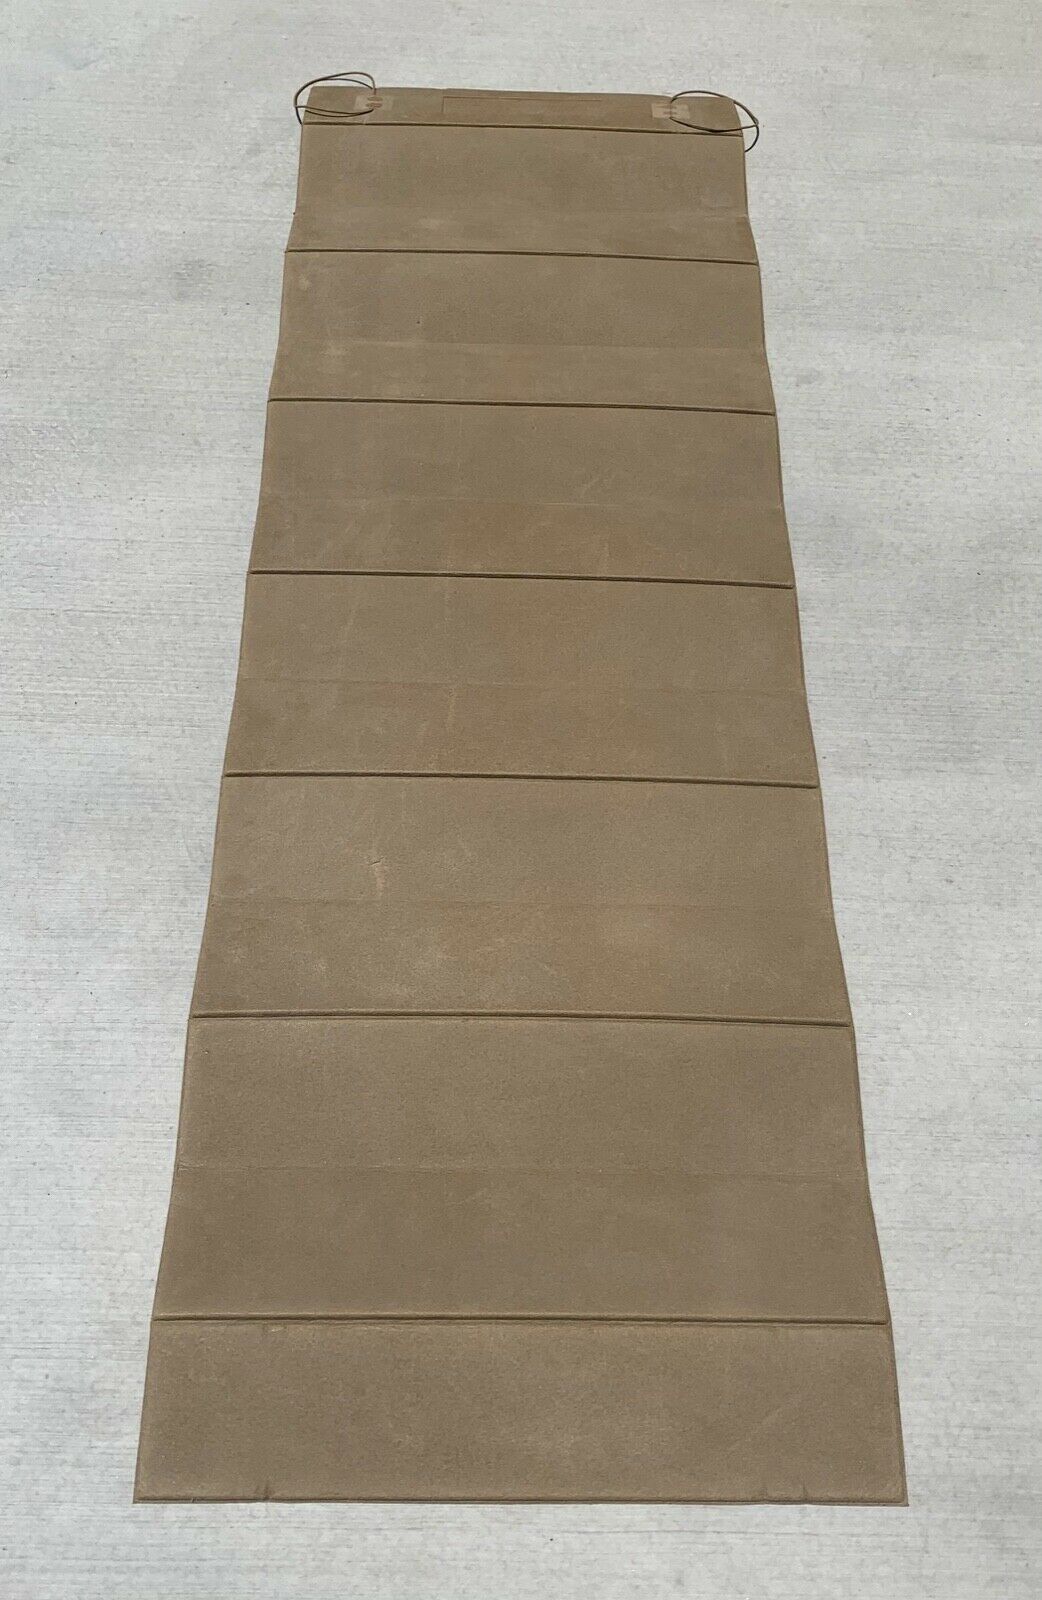 USMC Military Thermarest Accordion Folding Sleeping Mat Coyote Brown